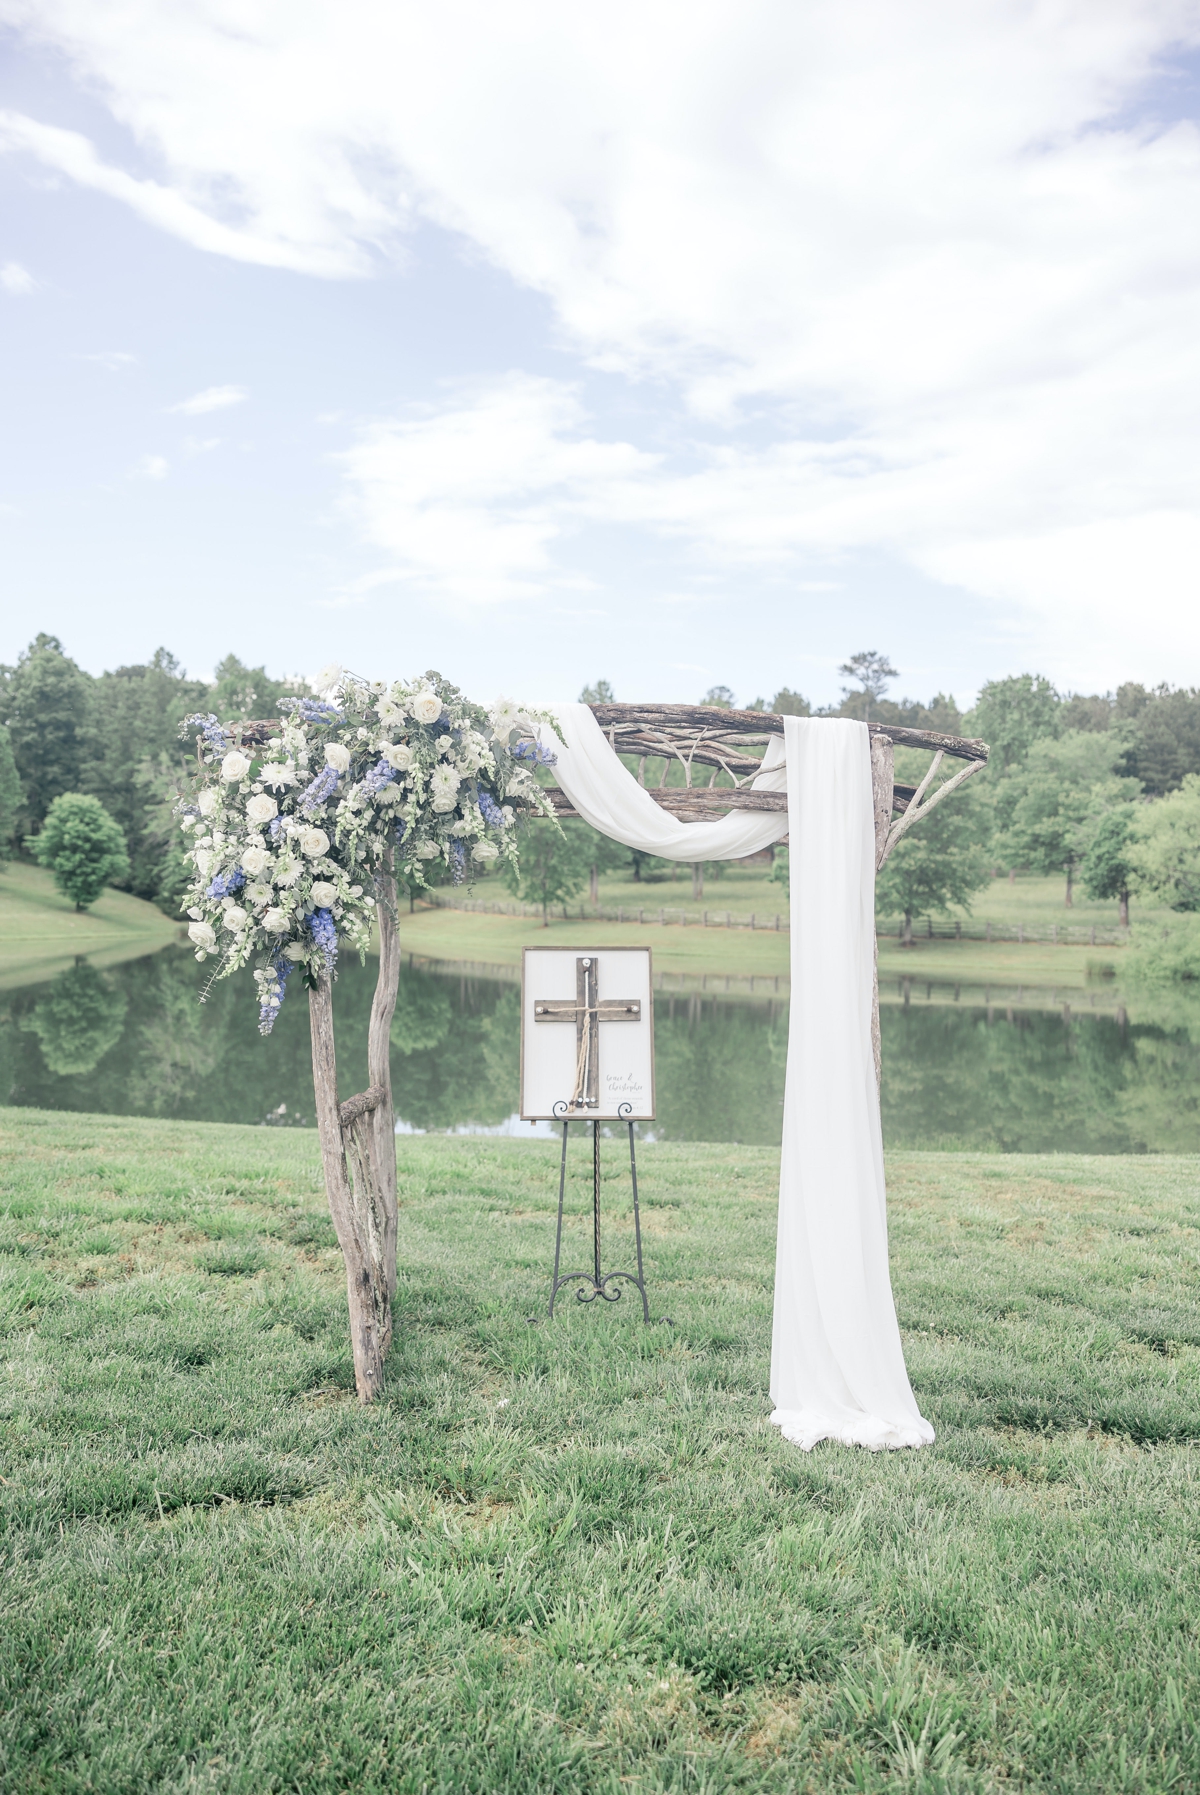 Detail photo of Chris and Grace's wedding day arch set up on the edge of a pond at Walters Barn.